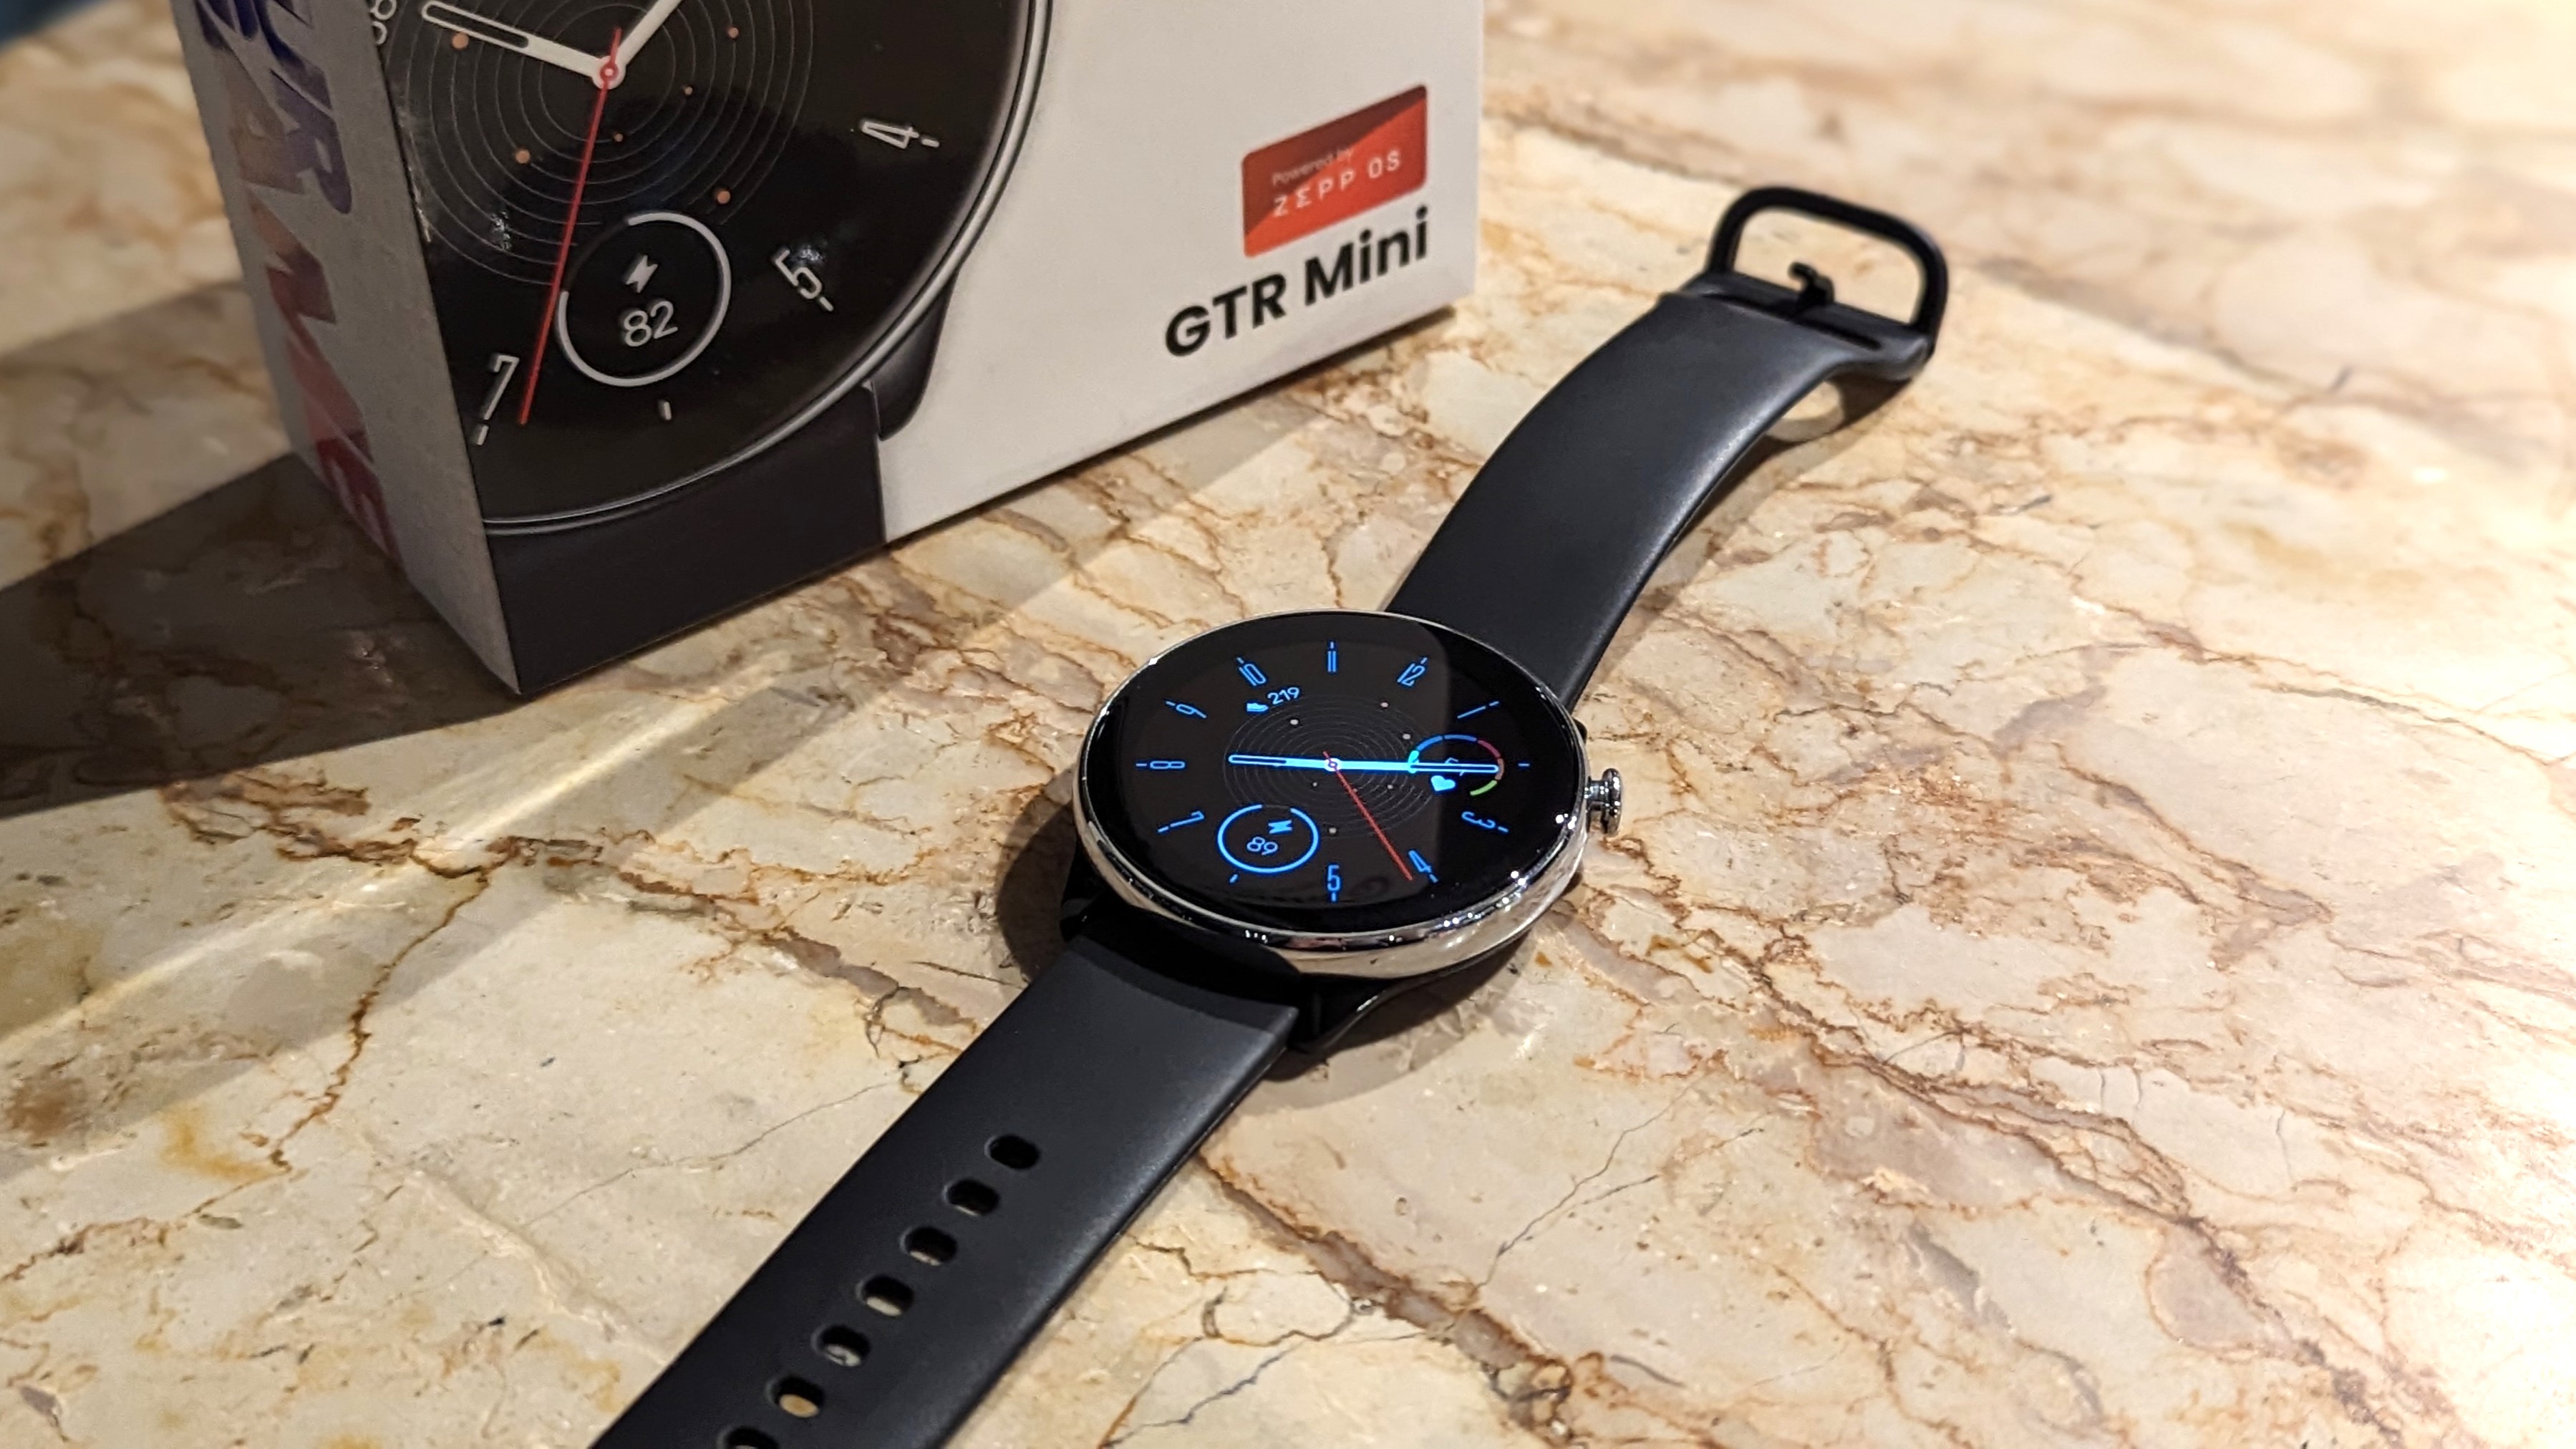 Amazfit GTR Mini smartwatch kept on a marble table.